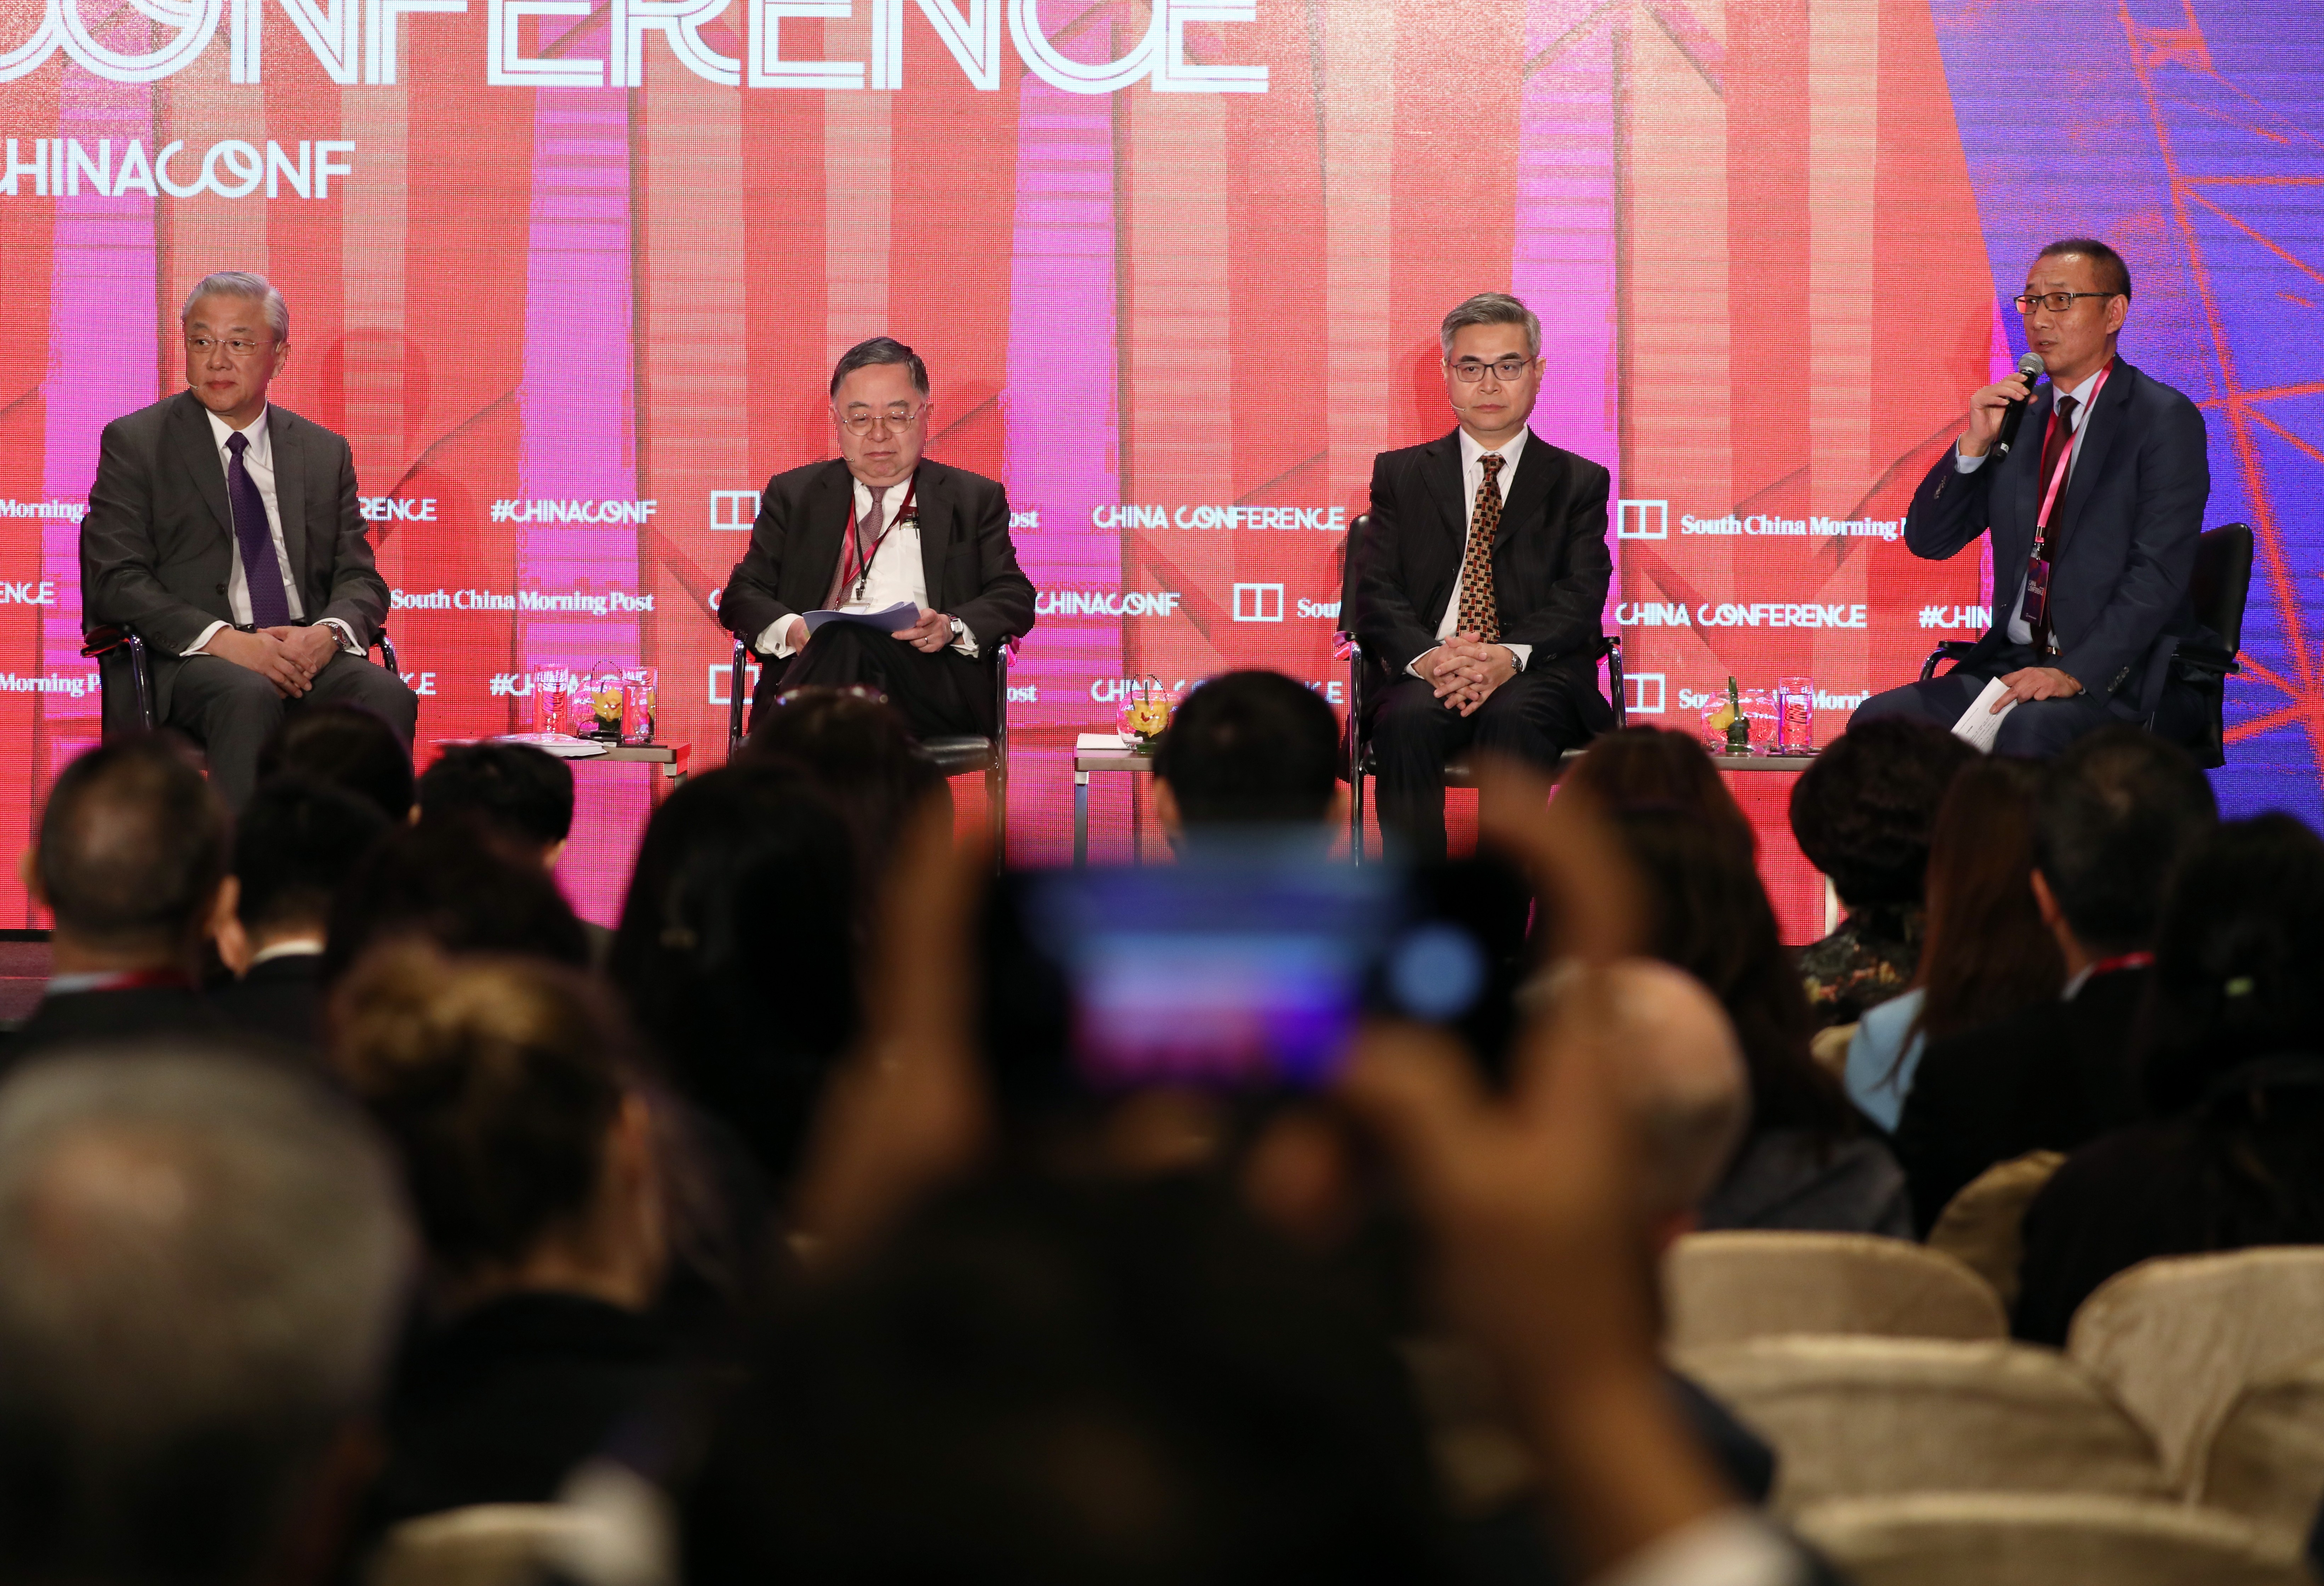 (L-R): Professor of Practice, Peking University HSBC Business School, Professor of Practice in Business and Economics, the University of Hong Kong, Professor Geng Xiao; Chairman, Hang Lung Properties, Ronnie Chan; President, America China Public Affairs Institute, Fred Teng; and Editorial Advisor at SCMP, Wang Xiang-wei, at the SCMP China Conference at JW Marriott Hotel in Admiralty. 21FEB19 SCMP / Nora Tam